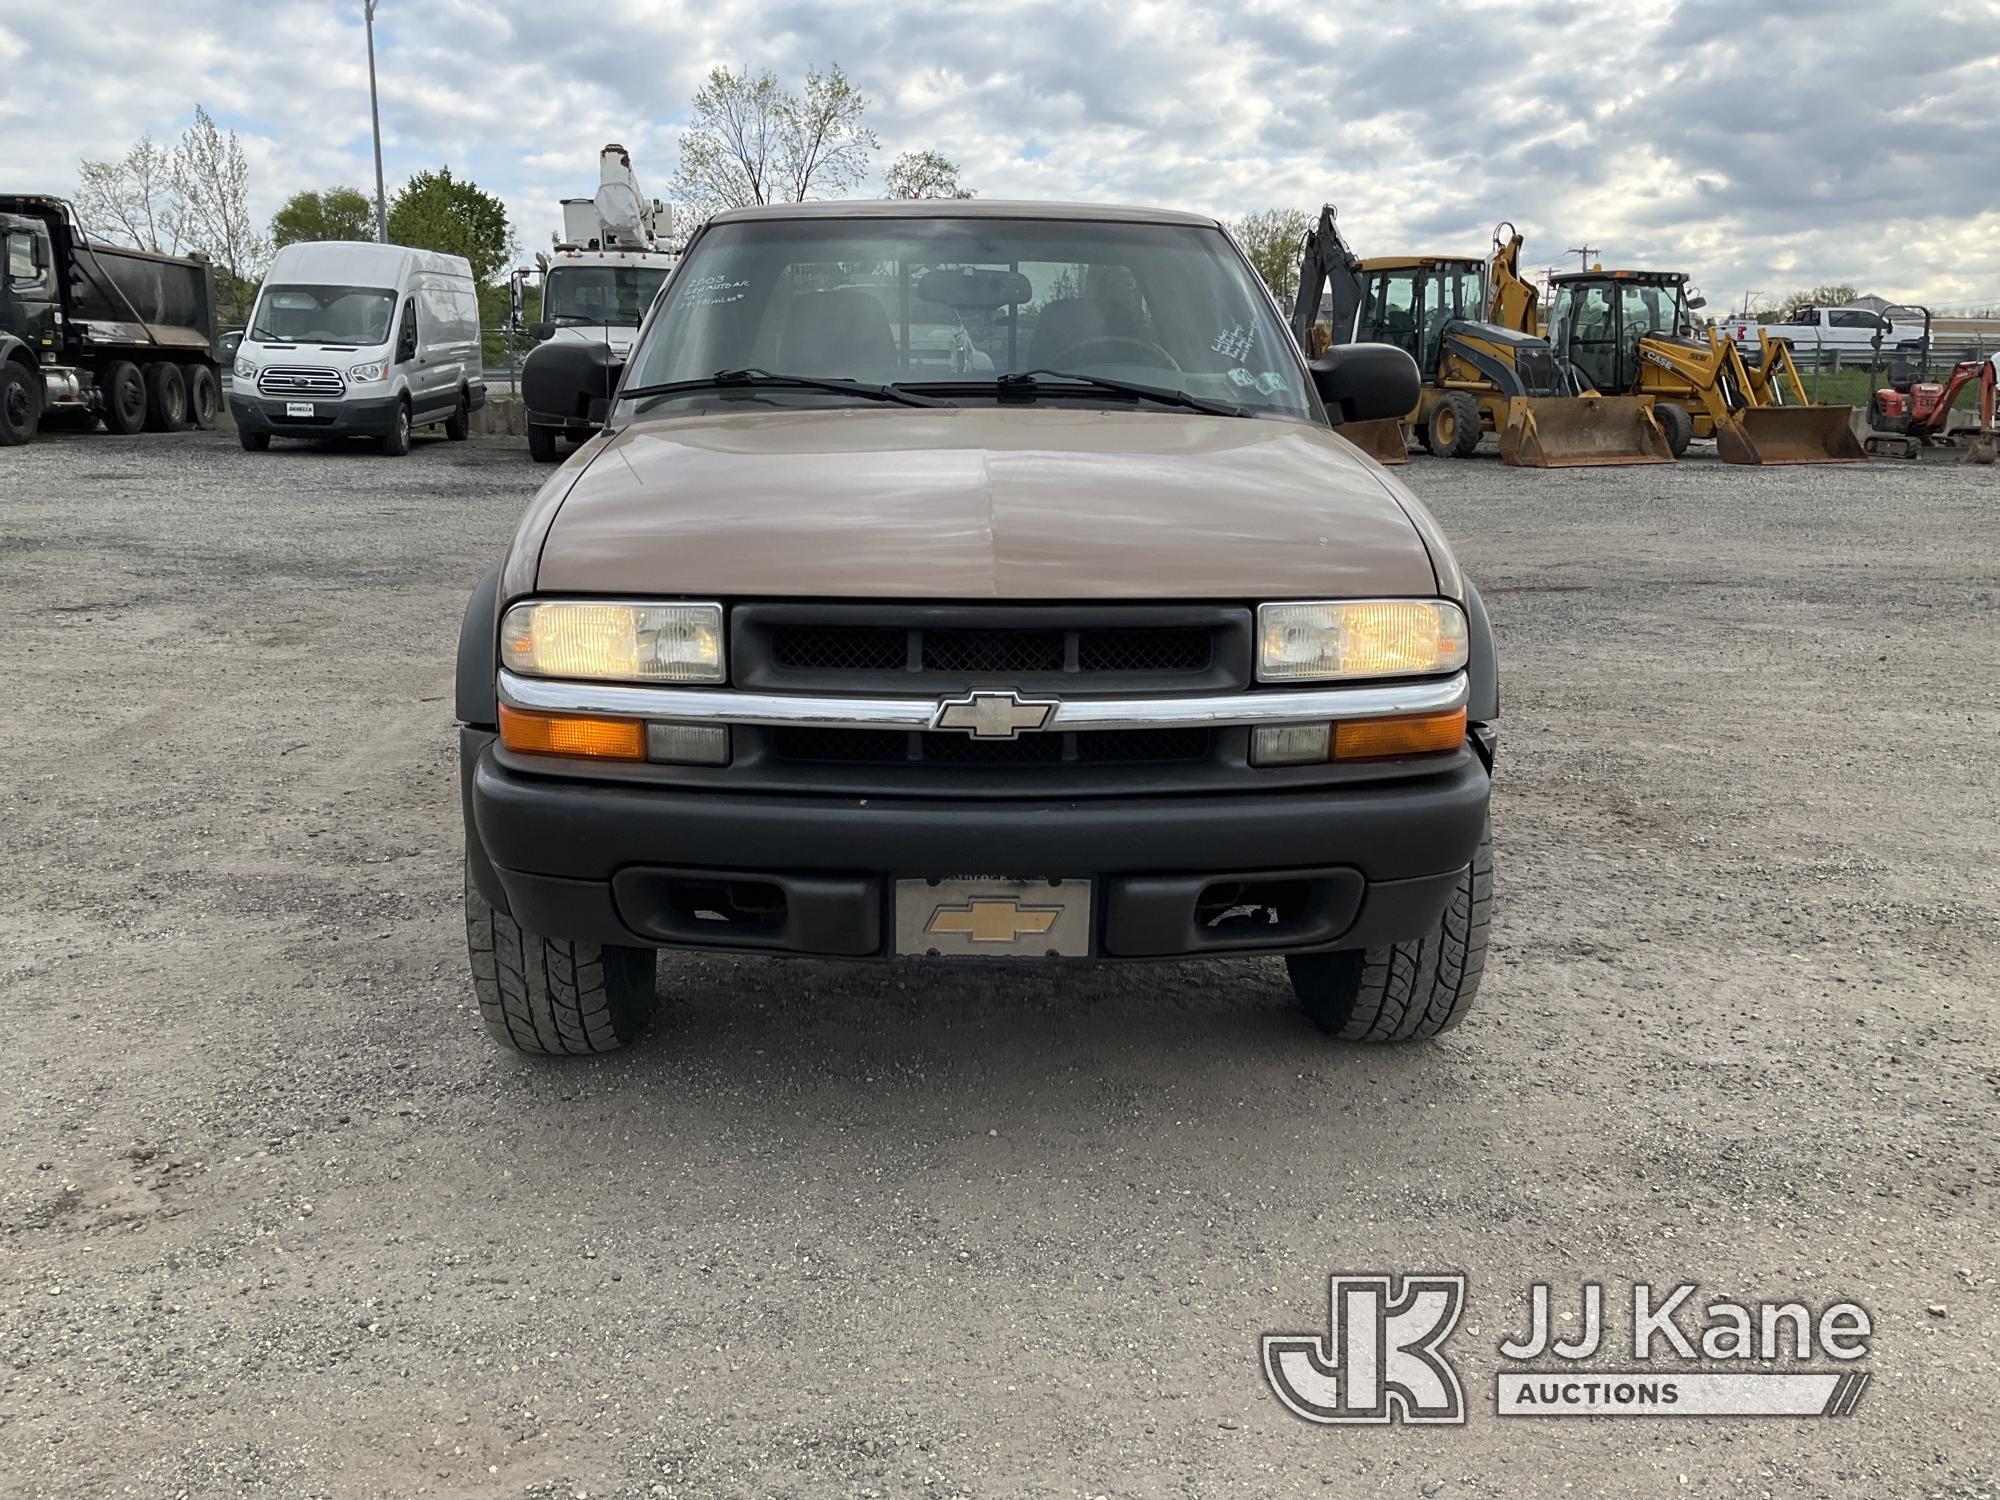 (Plymouth Meeting, PA) 2003 Chevrolet S10 4x4 Extended-Cab Pickup Truck